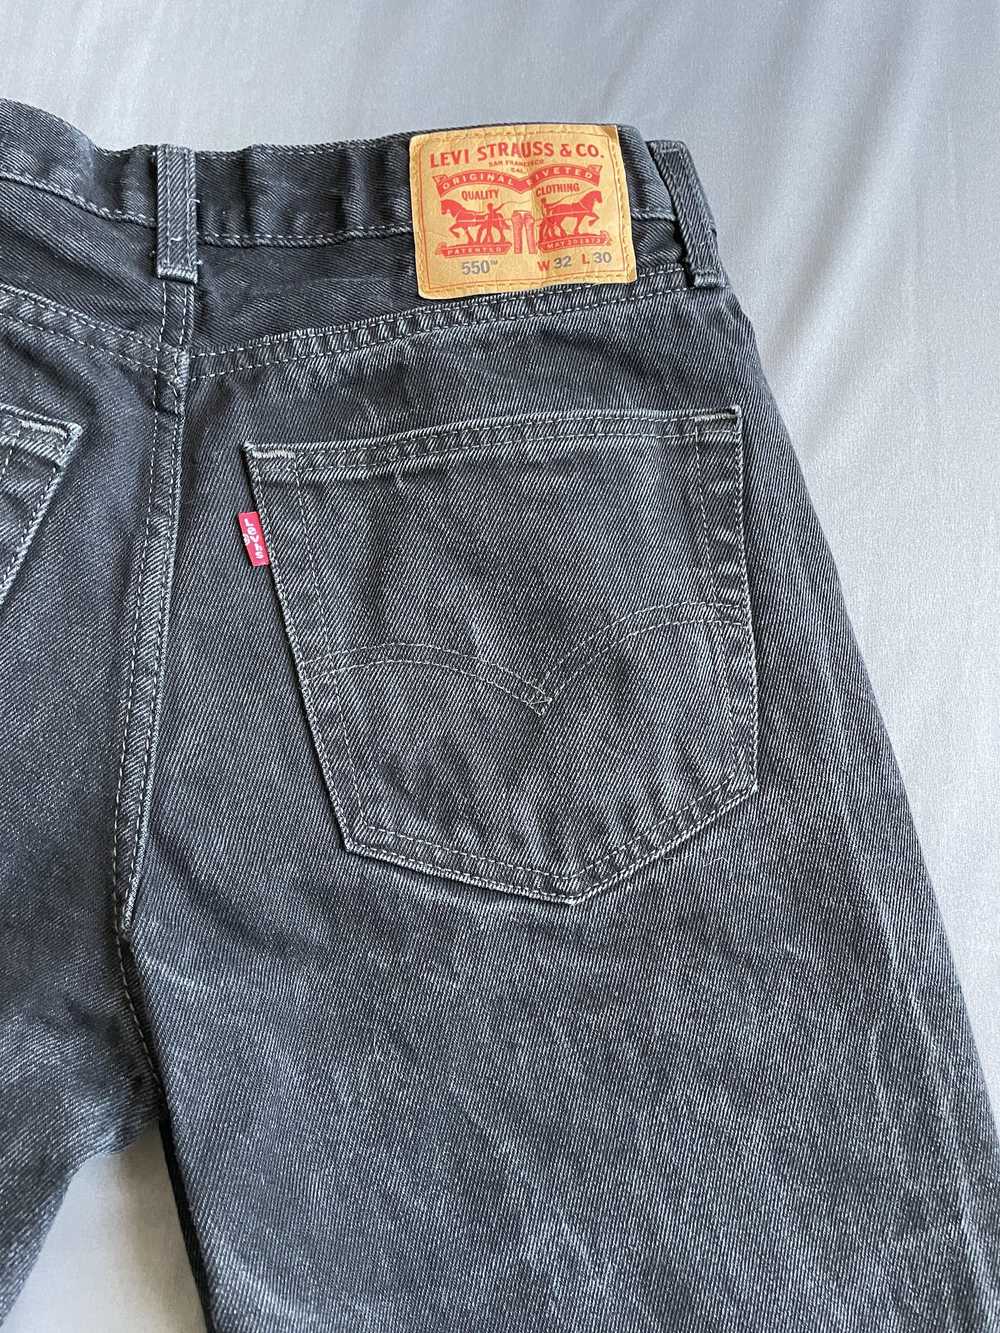 Levi's 550 Relaxed Fit Jeans - image 4